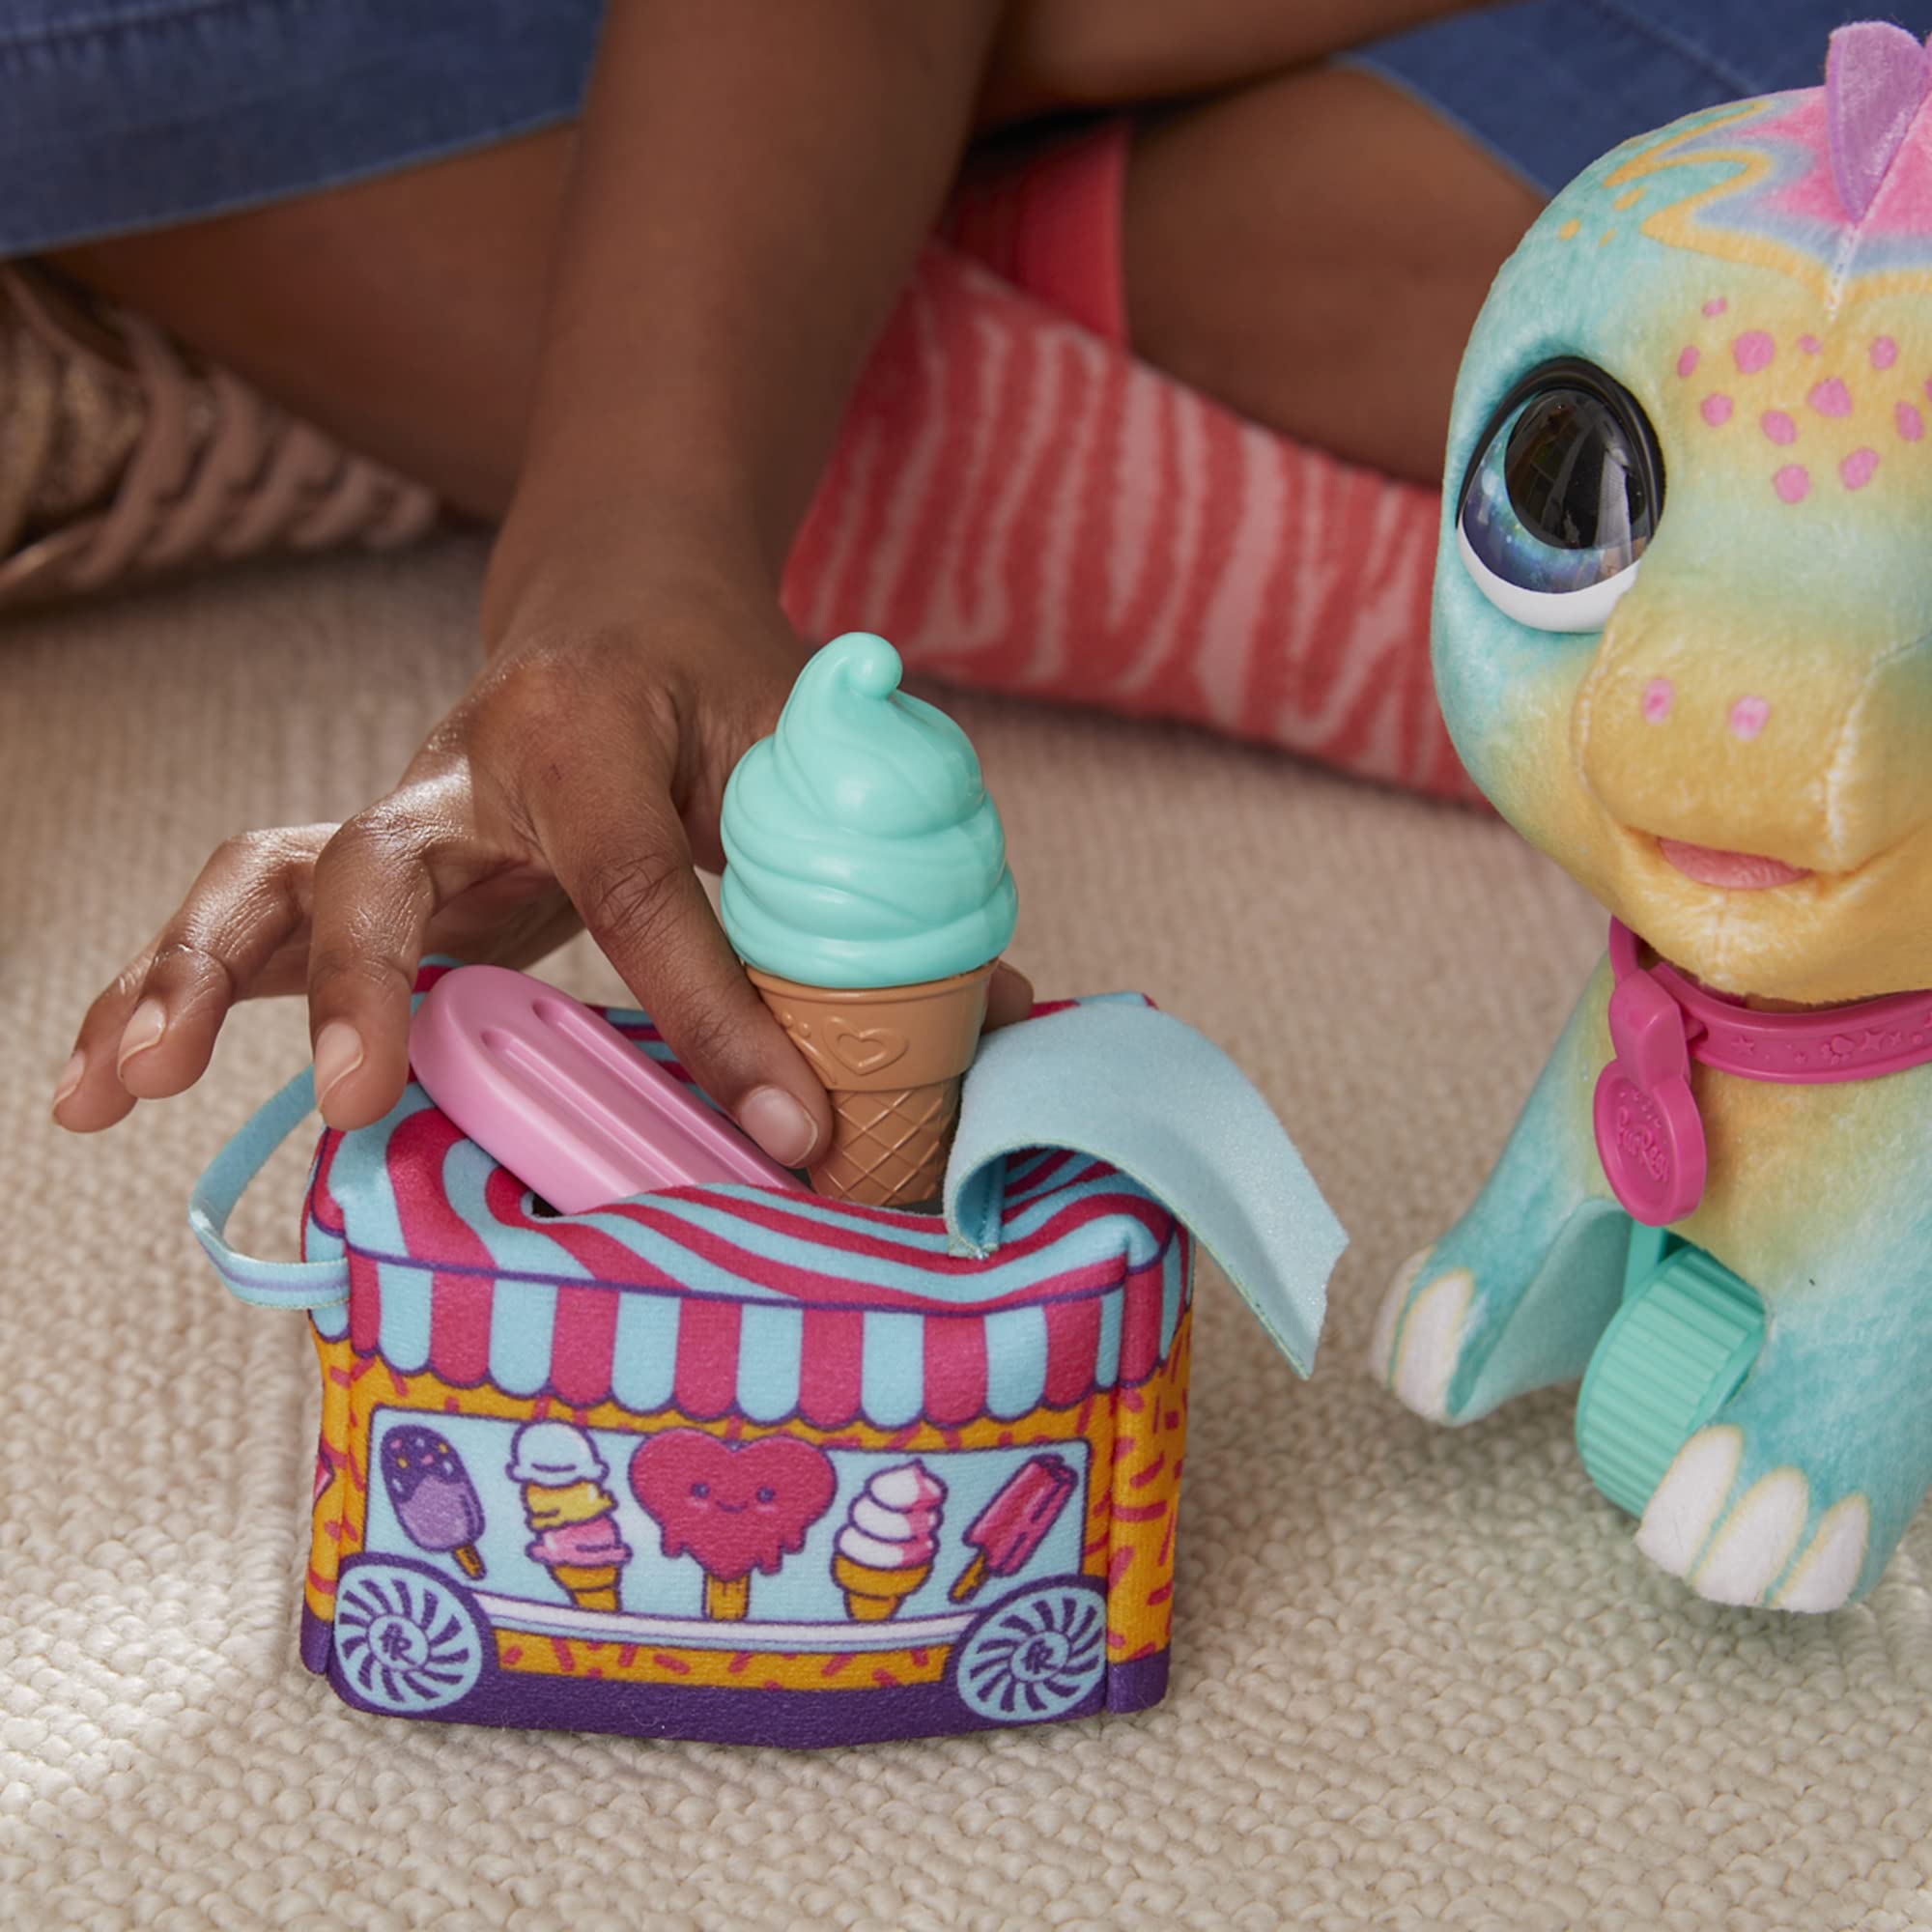 FurReal Snackin’ Sally’s Ice Cream Party Electronic Pet with 40+ Sounds and Reactions, Plus Walkalots Dinosaur; 5 Accessories; Ages 4 and Up (Amazon Exclusive)